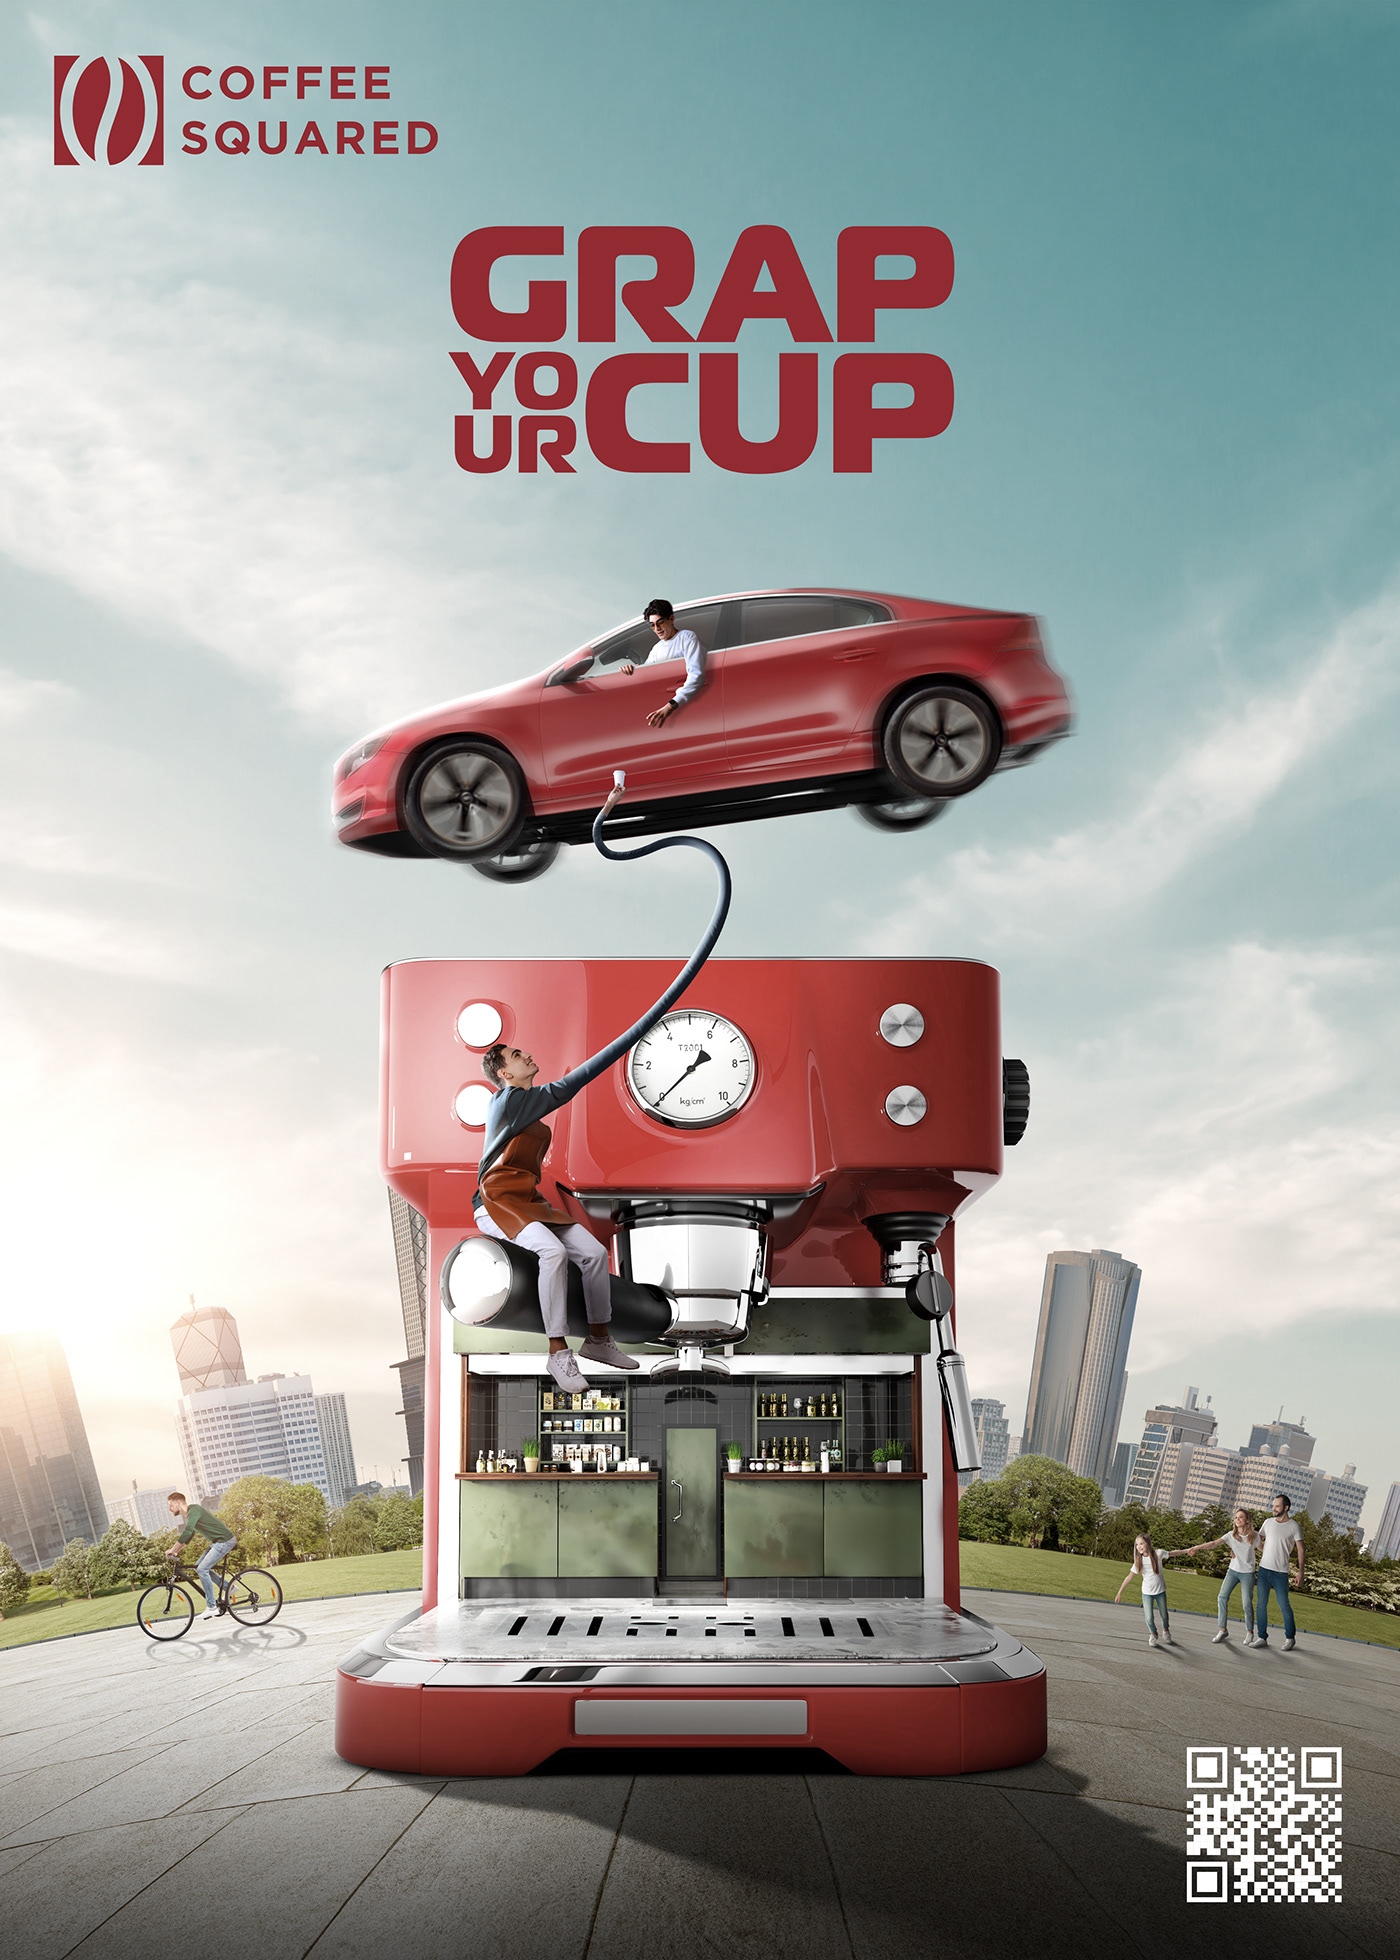 Coffee cafe Advertising  campaign takeaway delivery drivethru visualization visual design poster